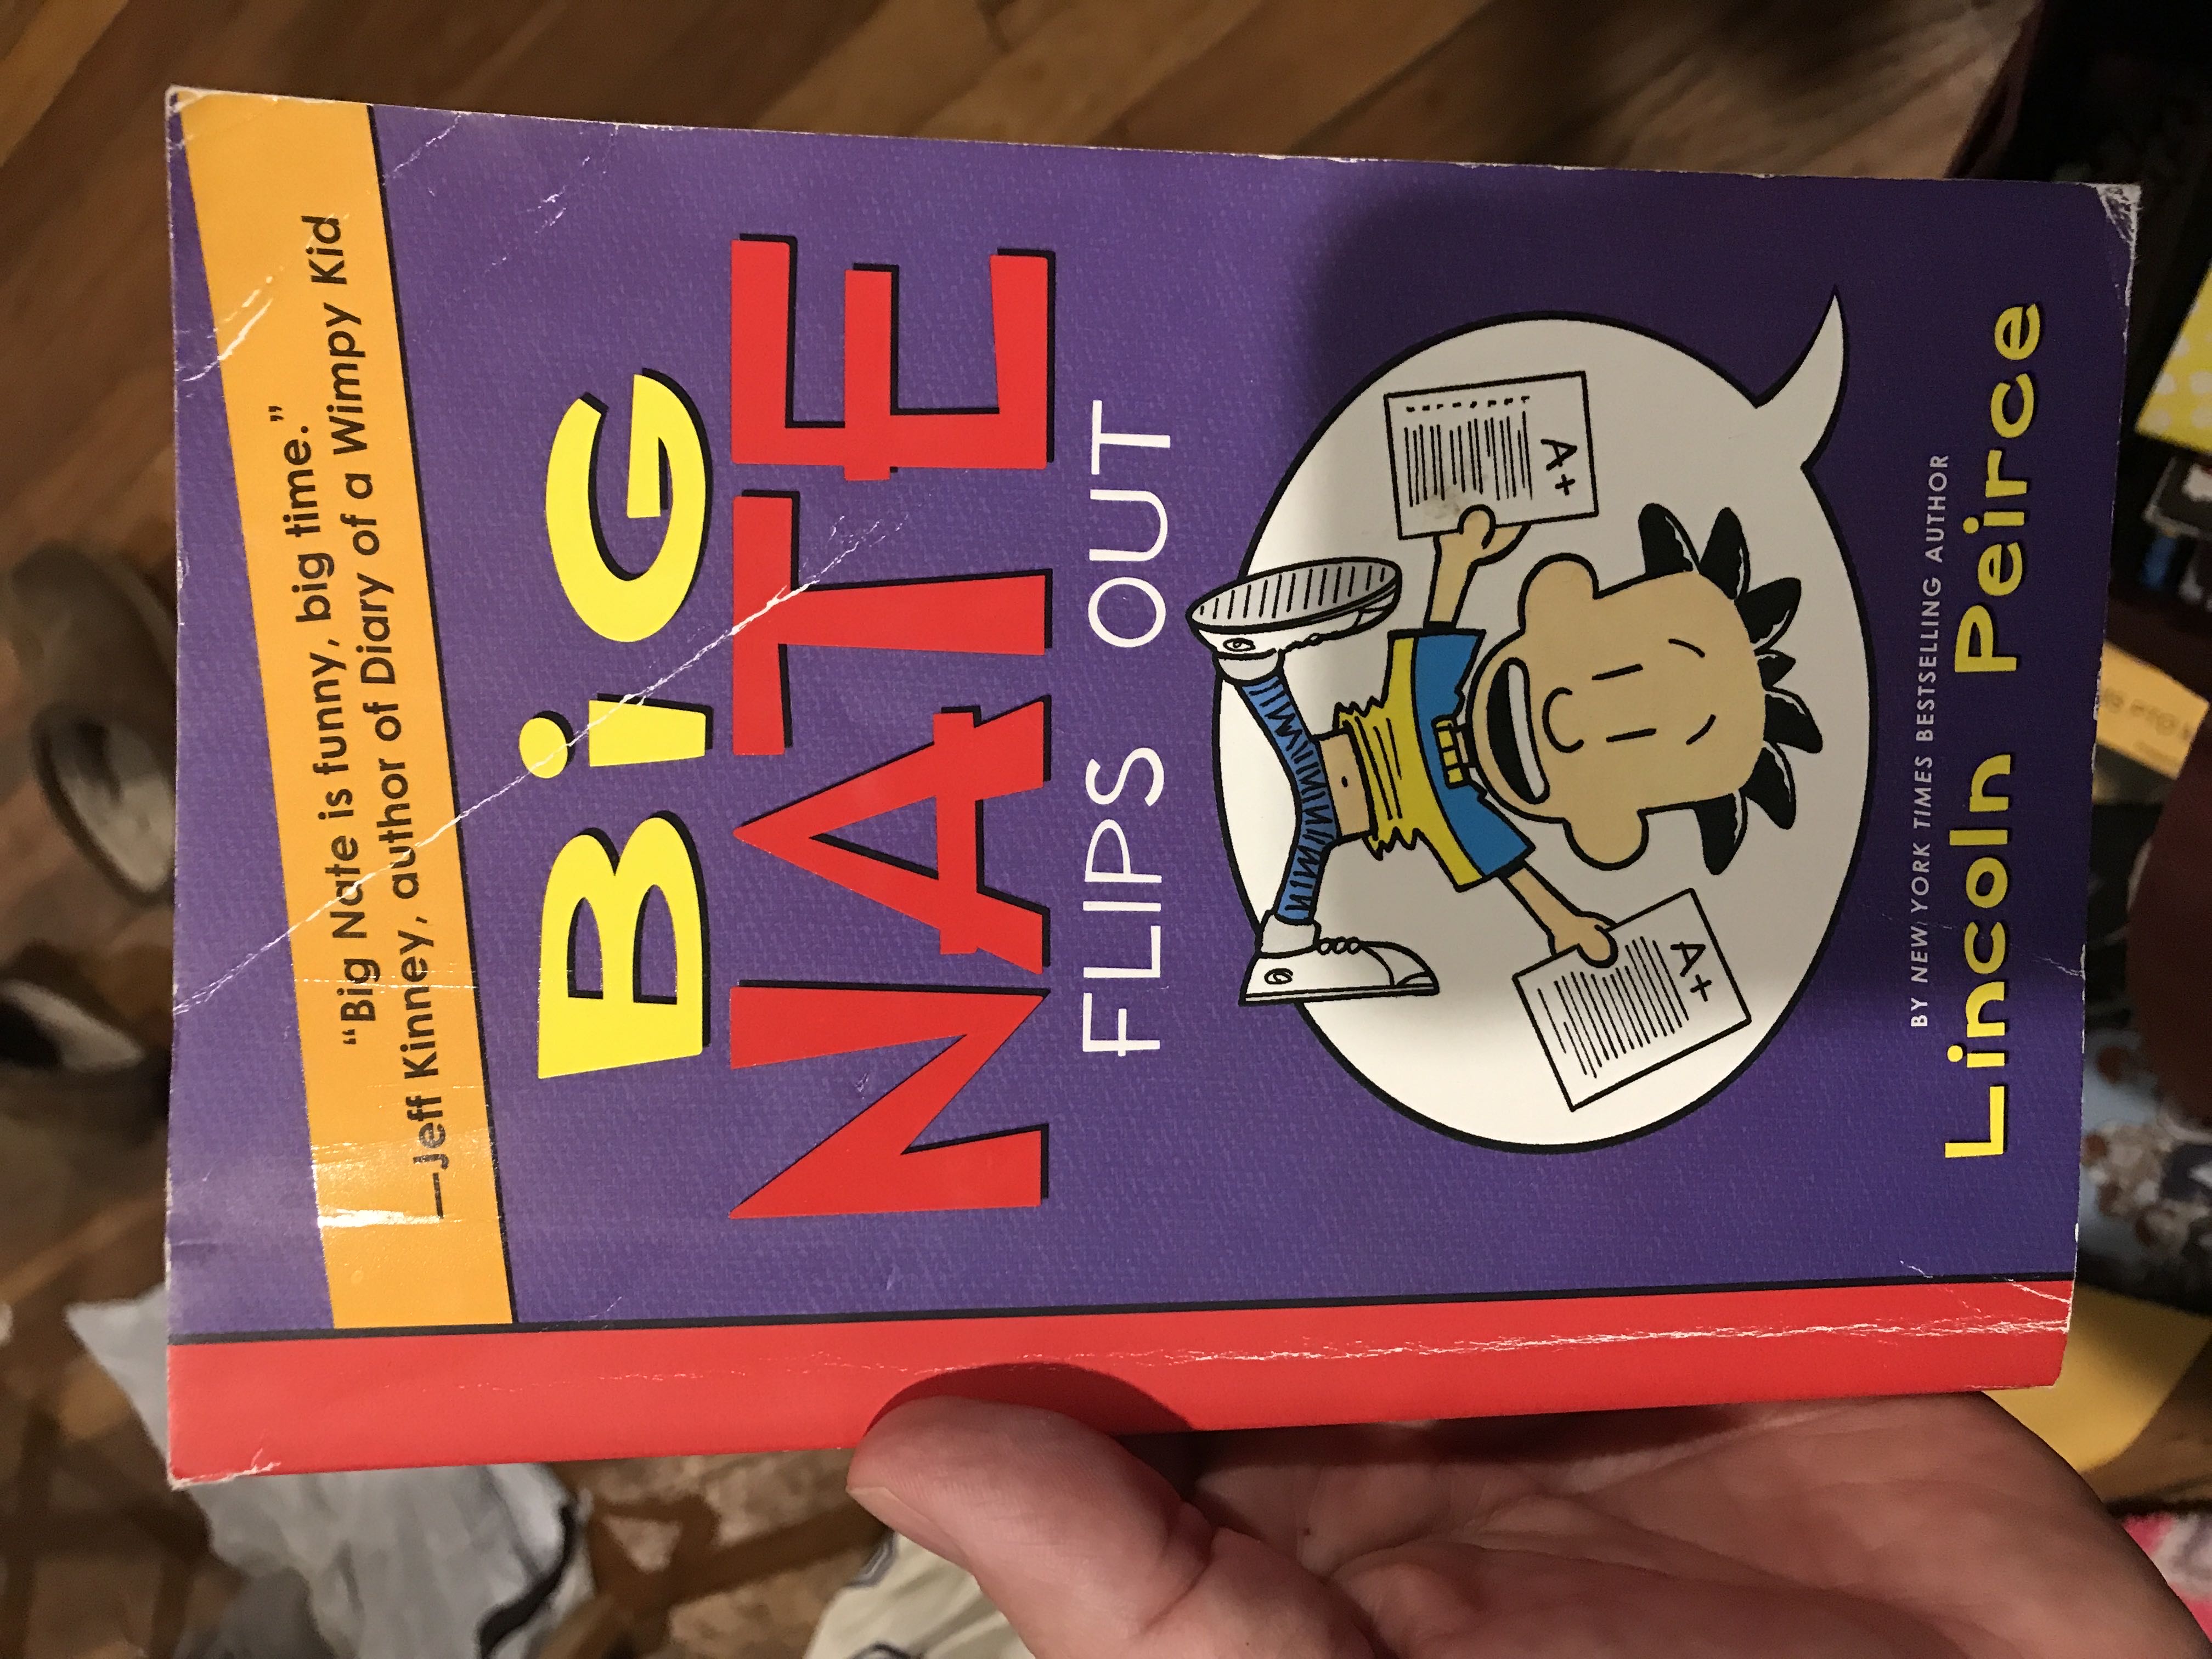 Big Nate: Book 5: Big Nate Flips Out - Lincoln Pierce (HarperCollins (April 8, 2014) - Paperback) book collectible [Barcode 9780062267191] - Main Image 1